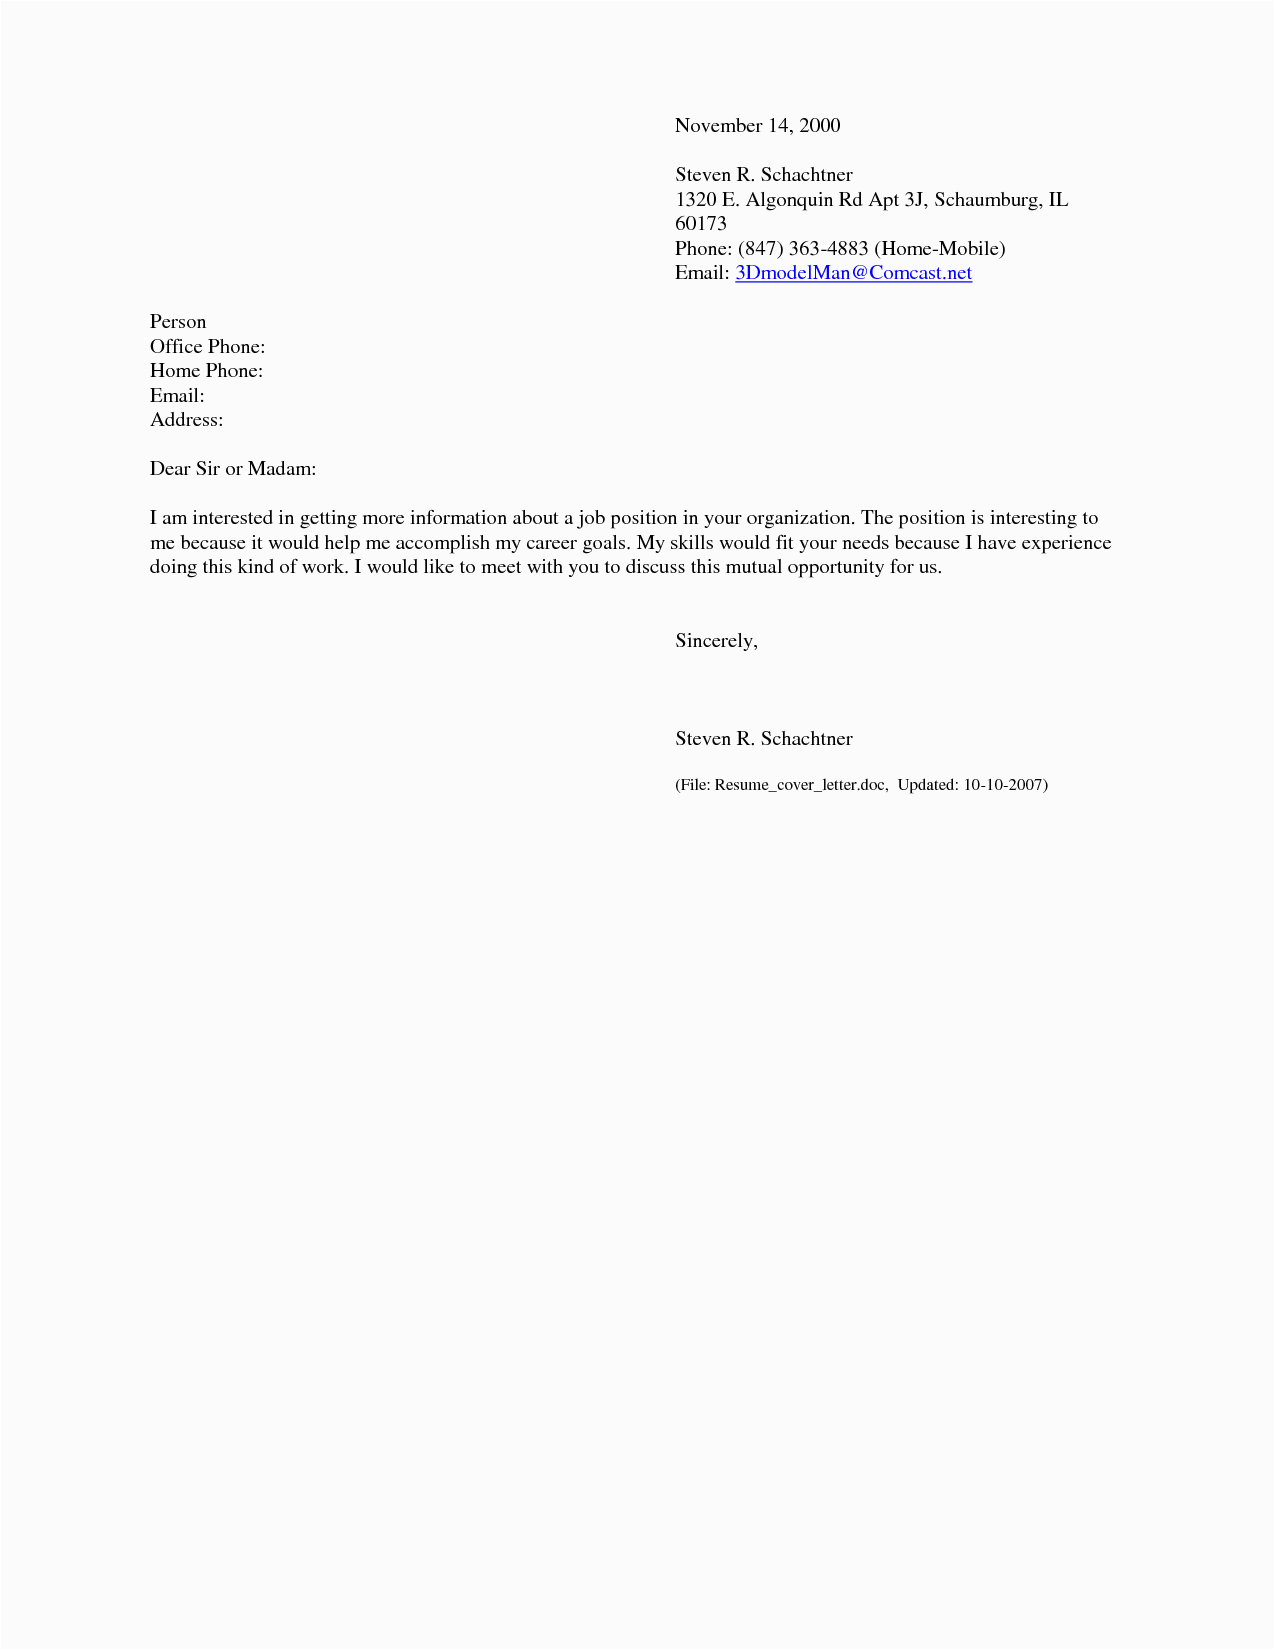 Email Sample to Send Resume and Cover Letter Cover Letter for Emailing Resume Database